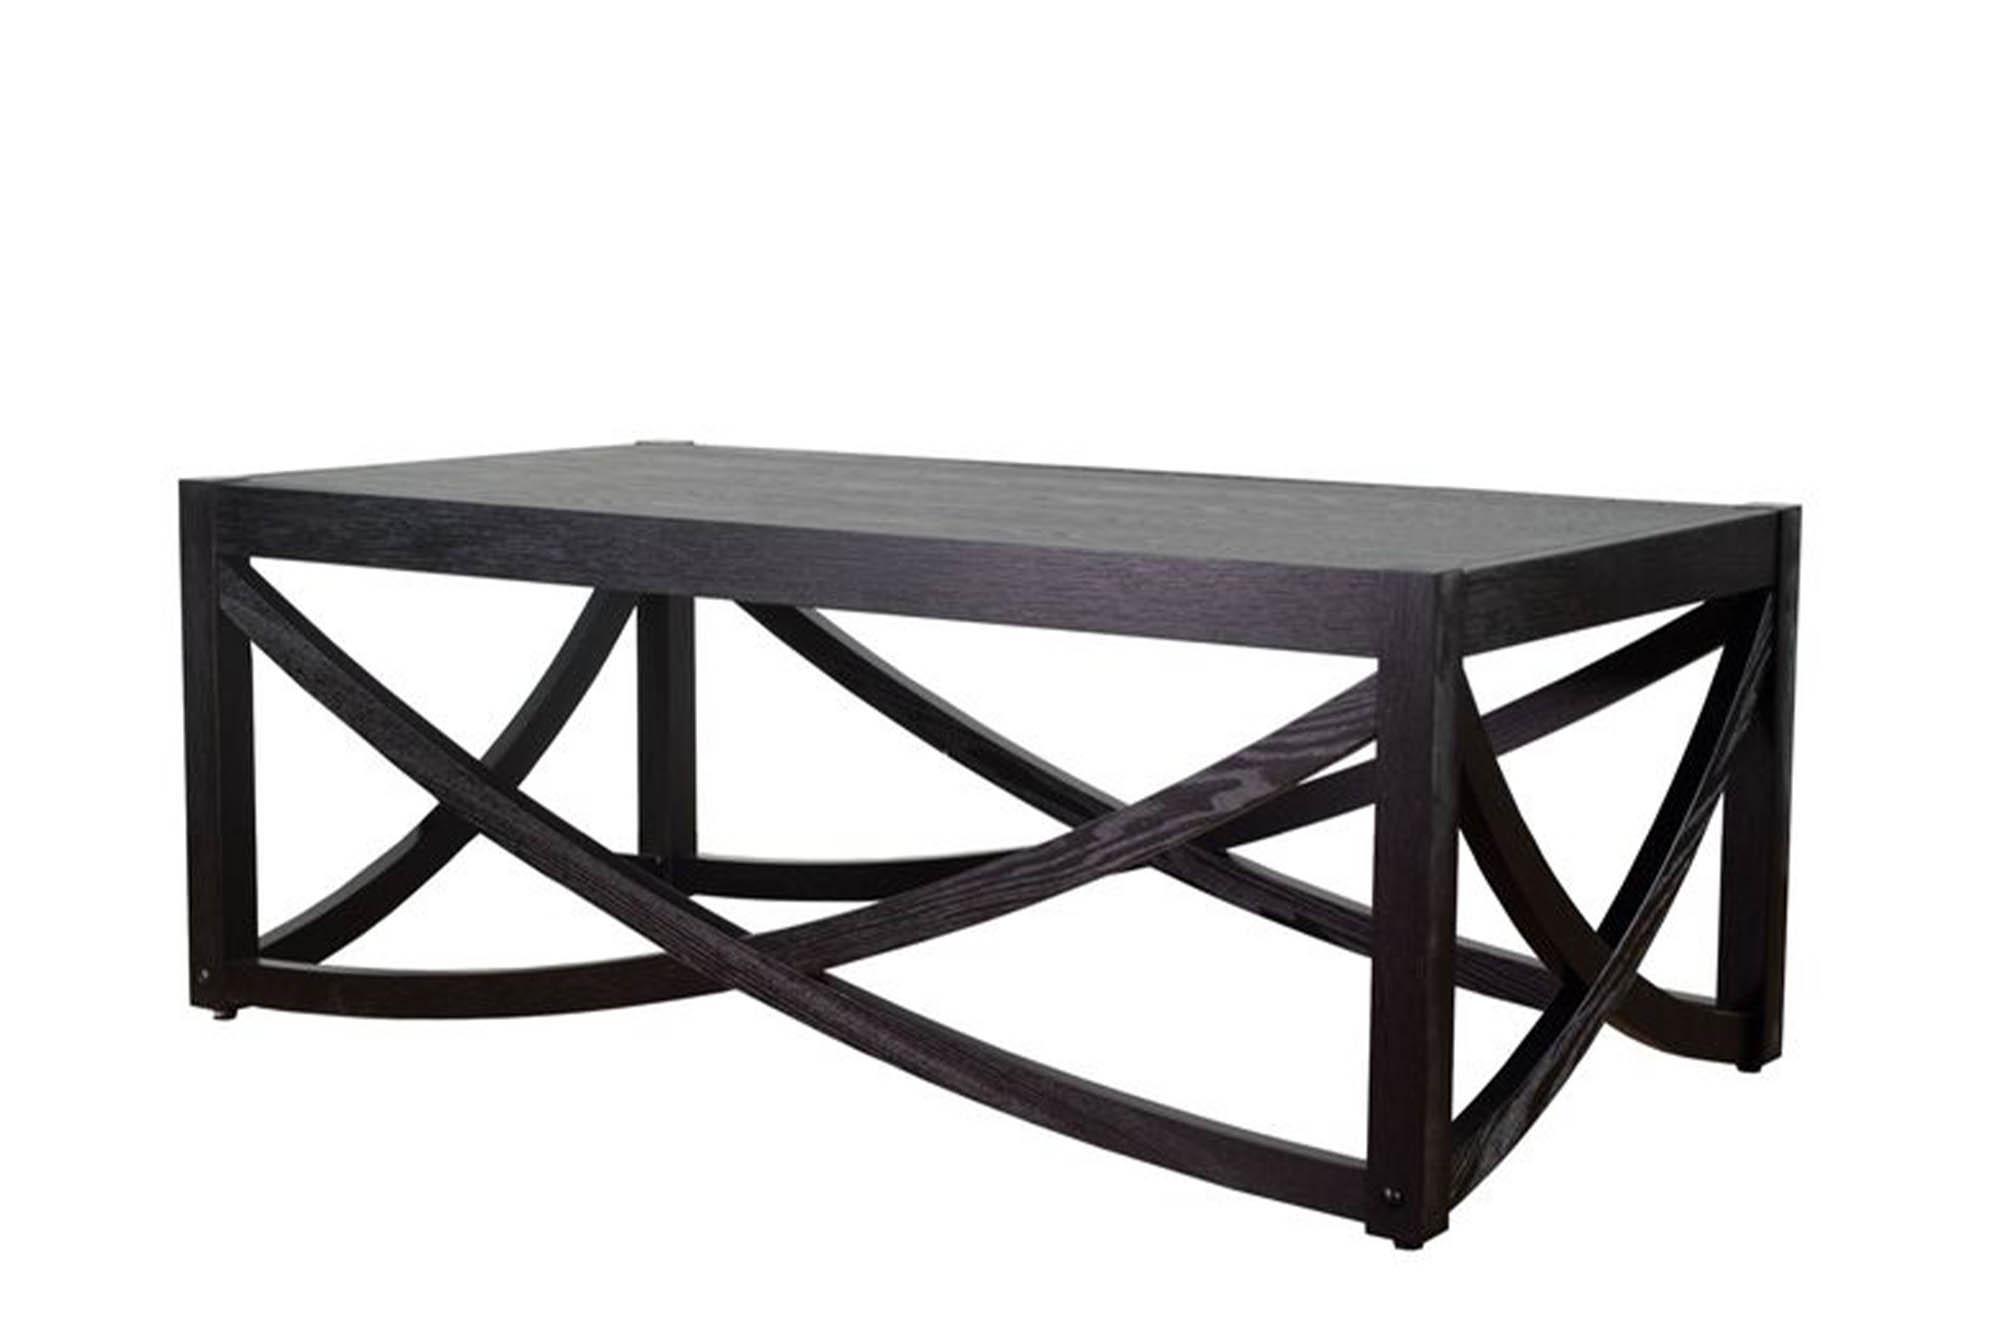 Modern, Transitional Cocktail Table Archie 5817-001 5817-001 in Black 